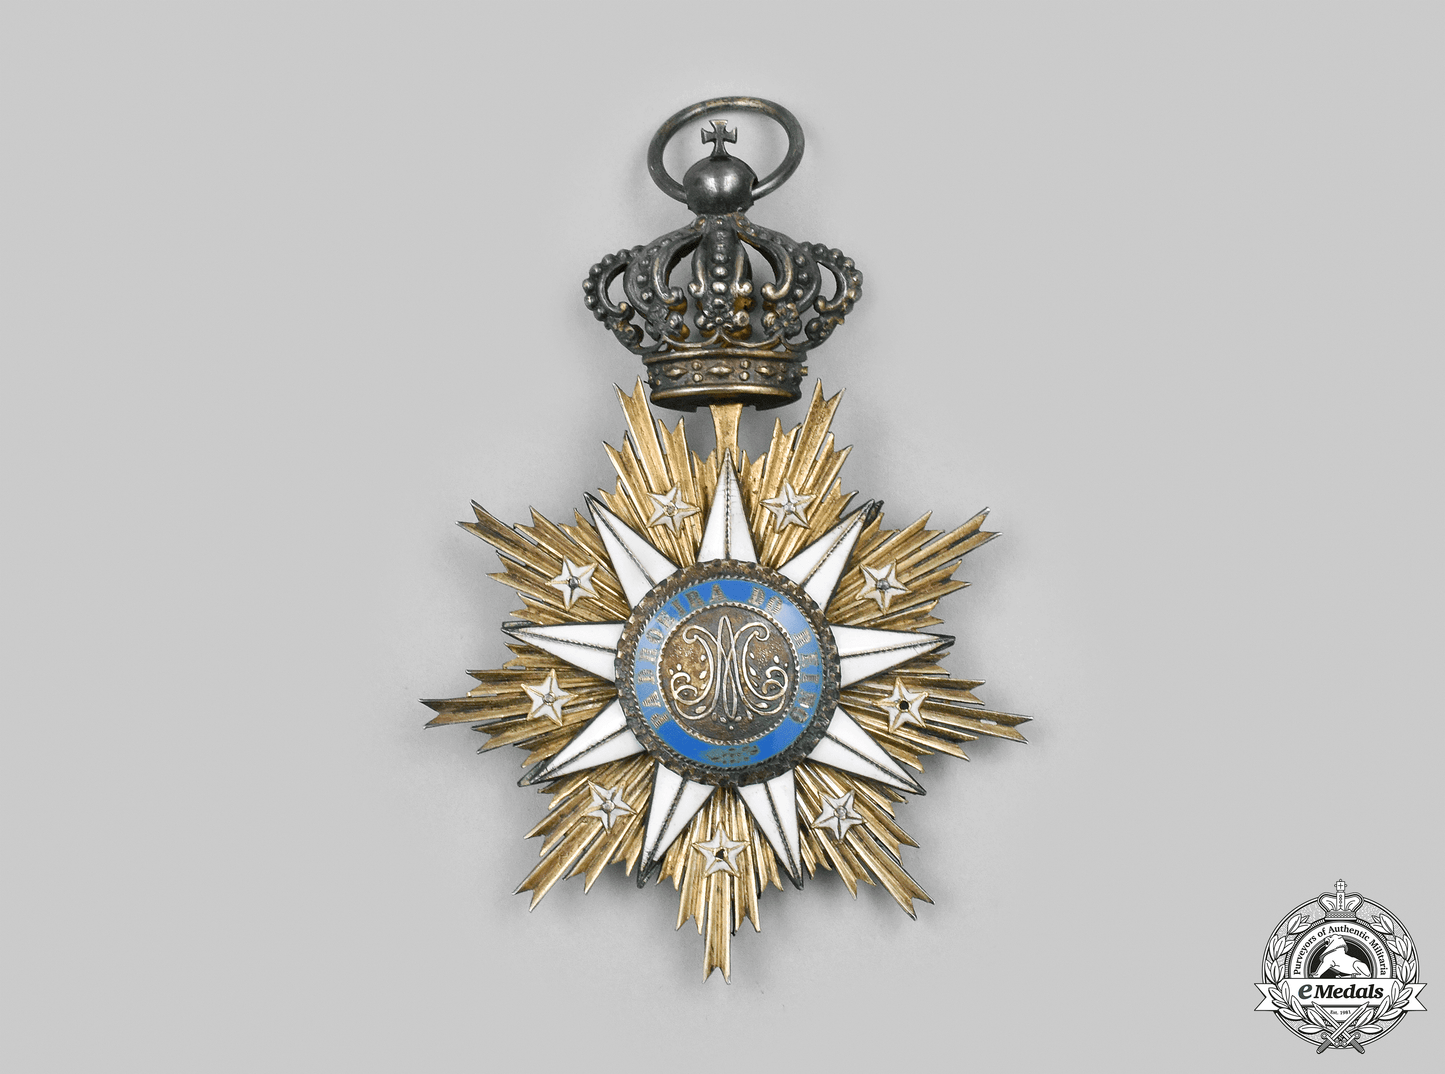 portugal,_kingdom._an_order_of_the_immaculate_conception_of_vila_viçosa,_i_class_grand_cross_badge,_c.1900_m21_mnc4502